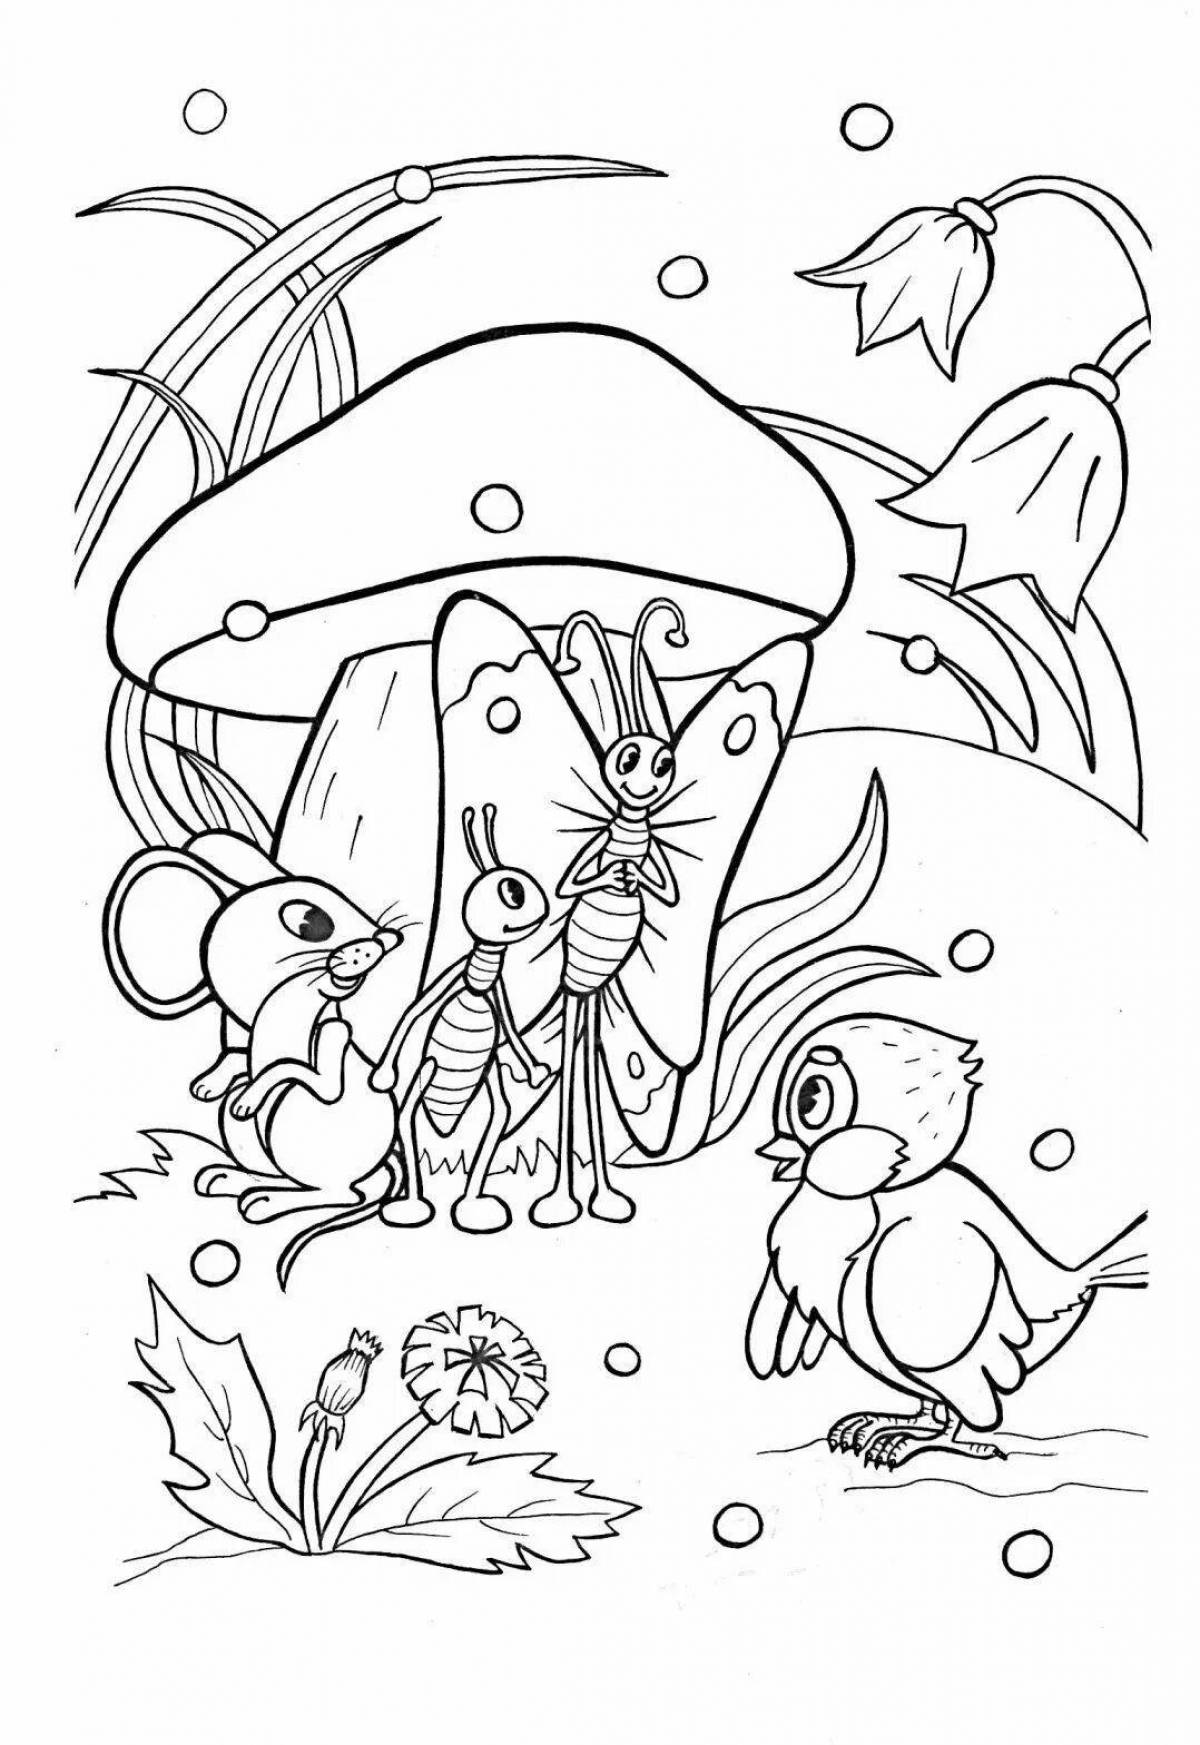 Violent fairy tale coloring book for kids